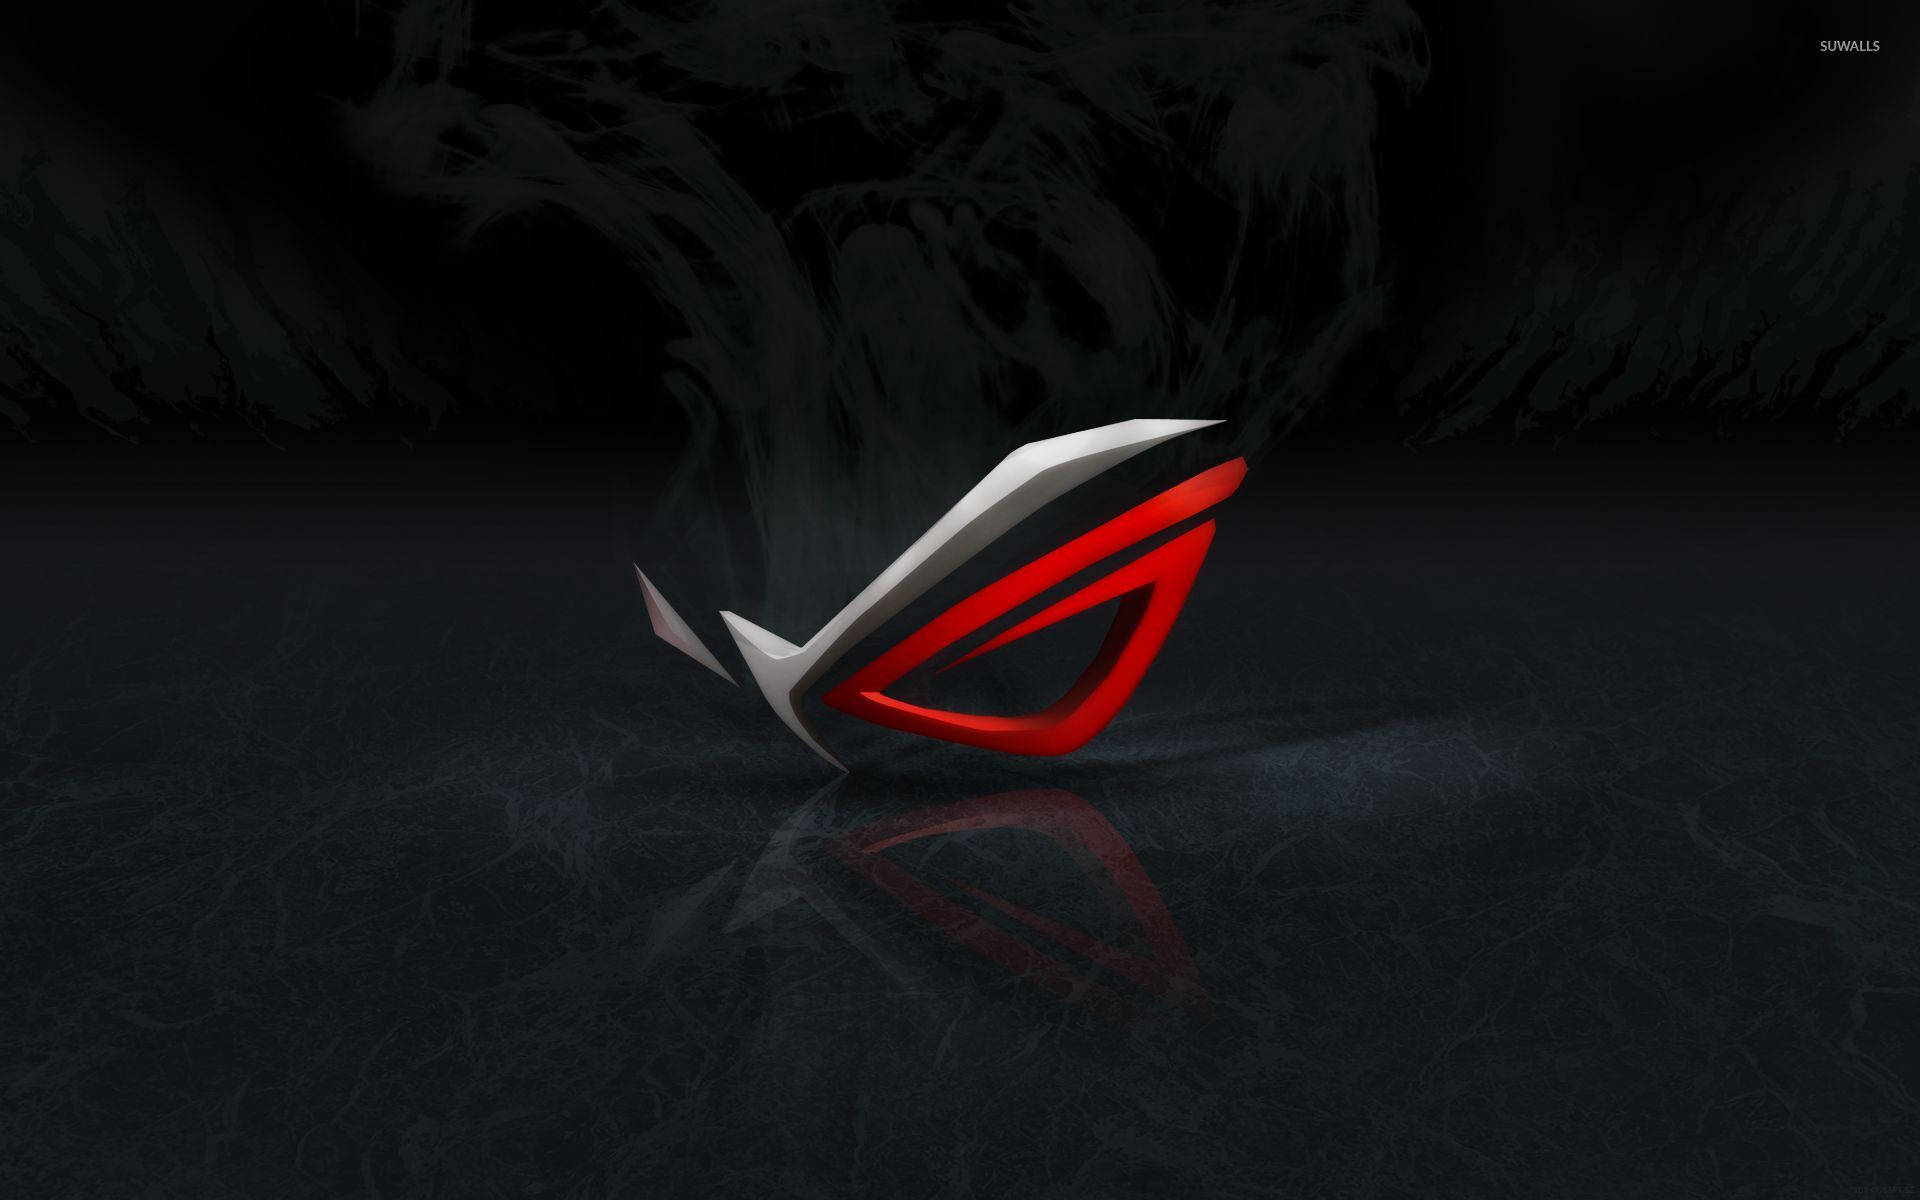 1920X1200 Asus Wallpaper and Background